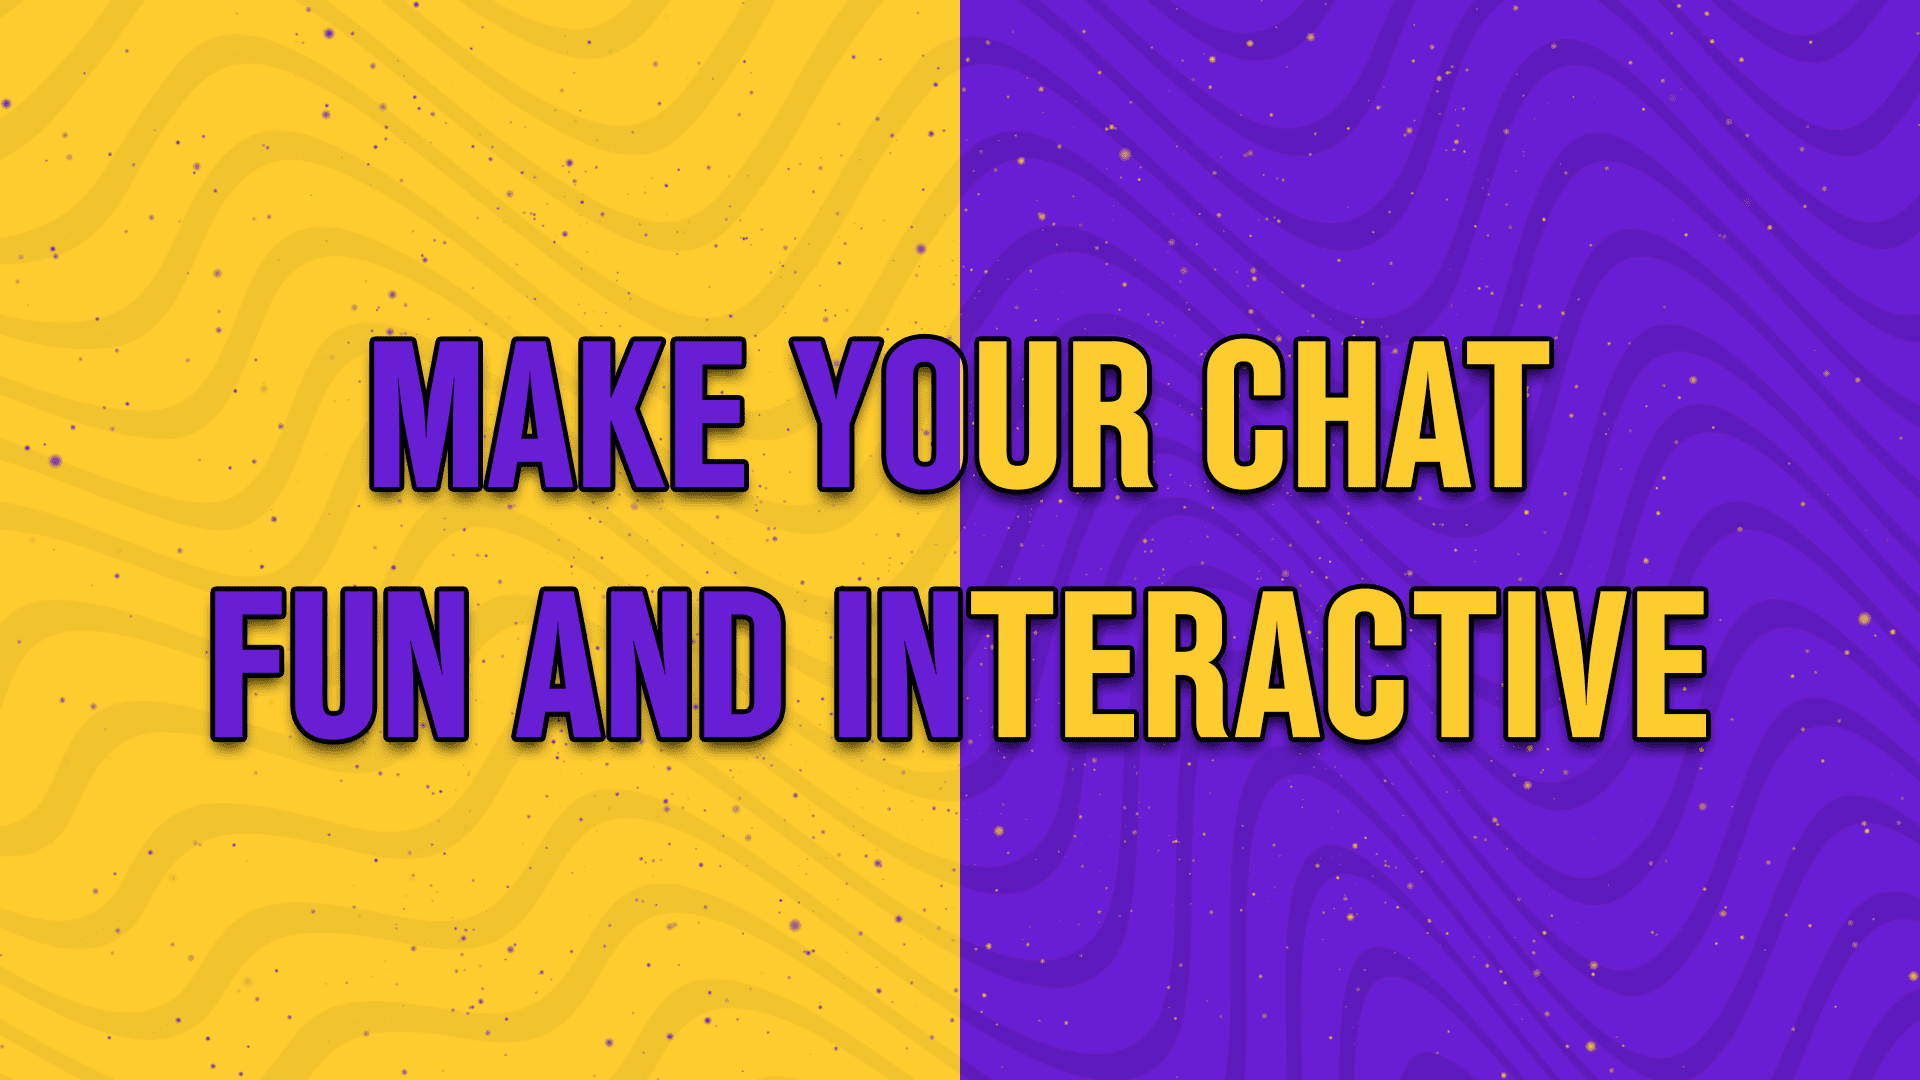 Make your chat fun and interactive - StreamBee